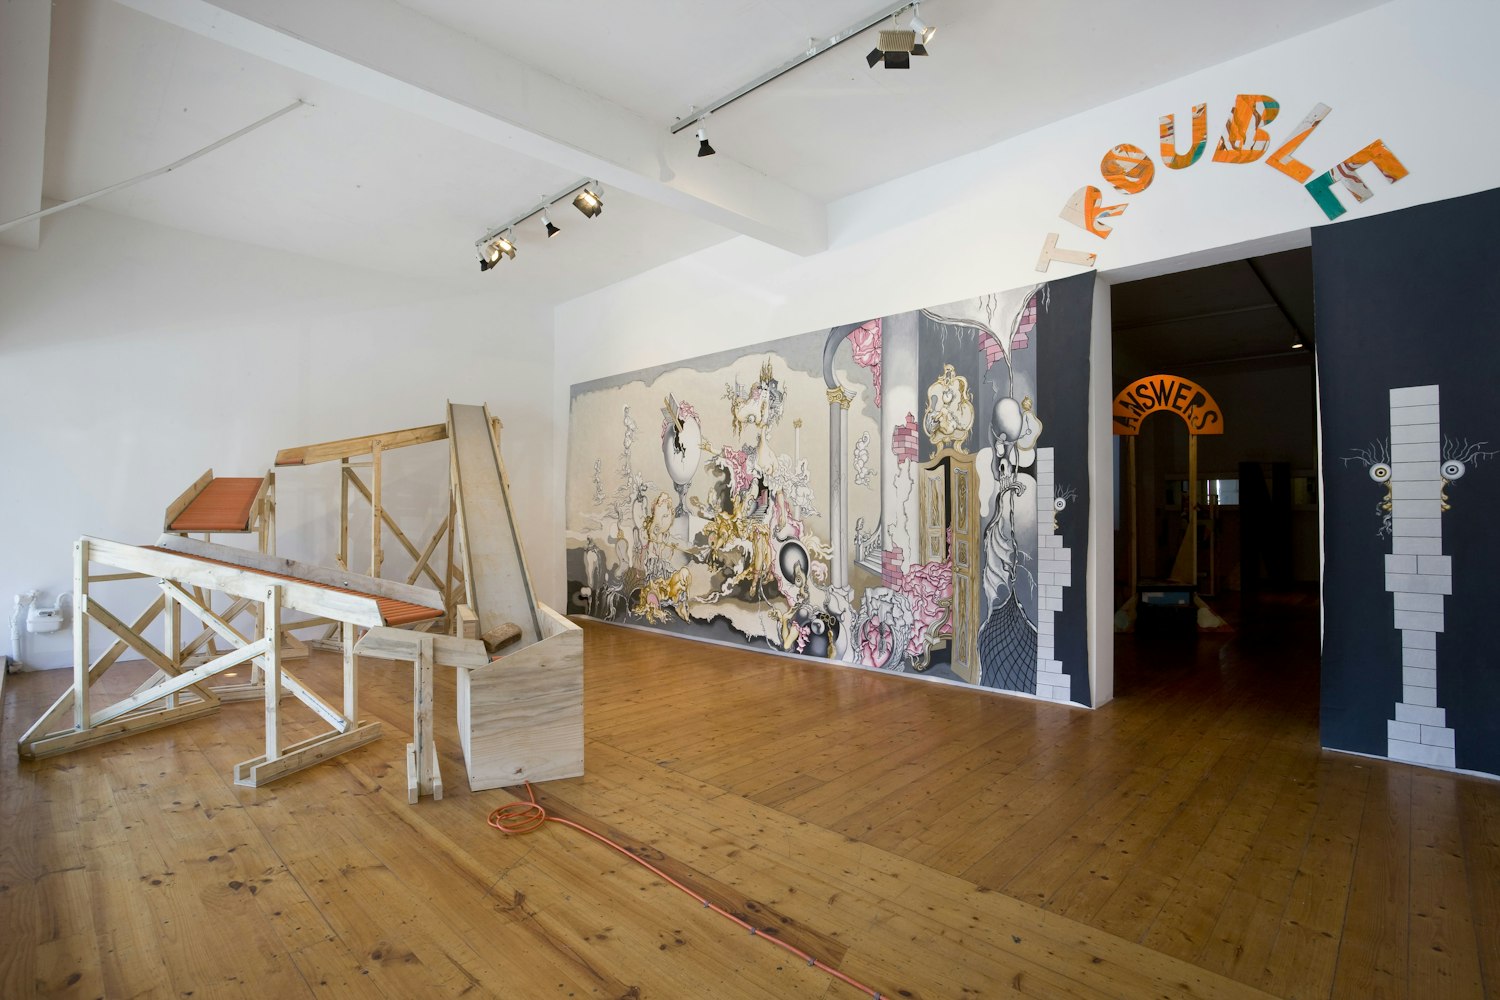 Installation view of Oblivion Pavilion, featuring the work of Marley Dawson, Tim Schultz and Agatha Goethe-Snape at 200 Gertrude Street